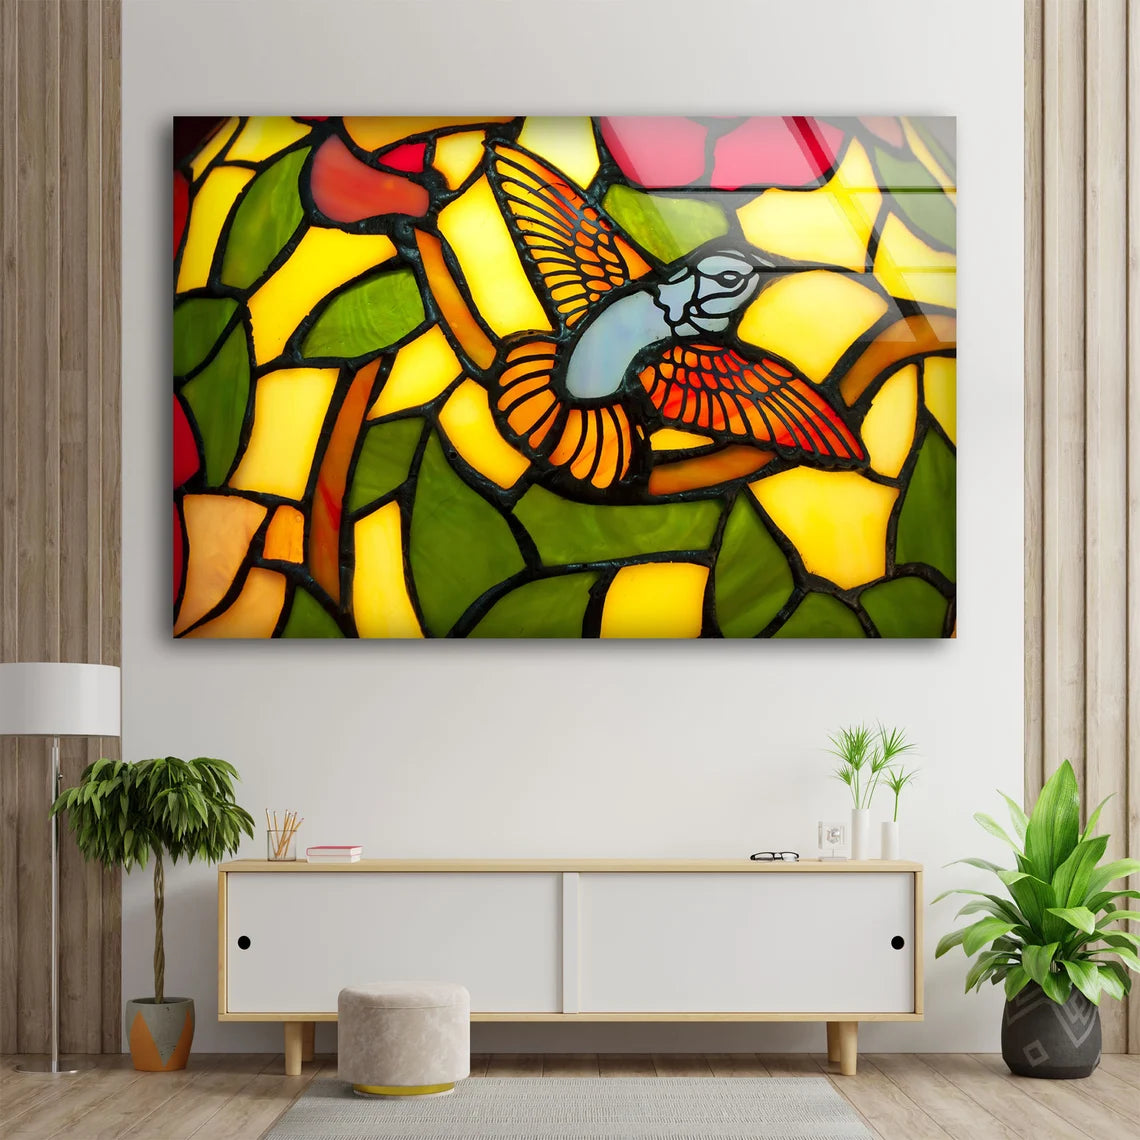 Bird & Shapes Abstract Design Acrylic Glass Print Tempered Glass Wall Art 100% Made in Australia Ready to Hang